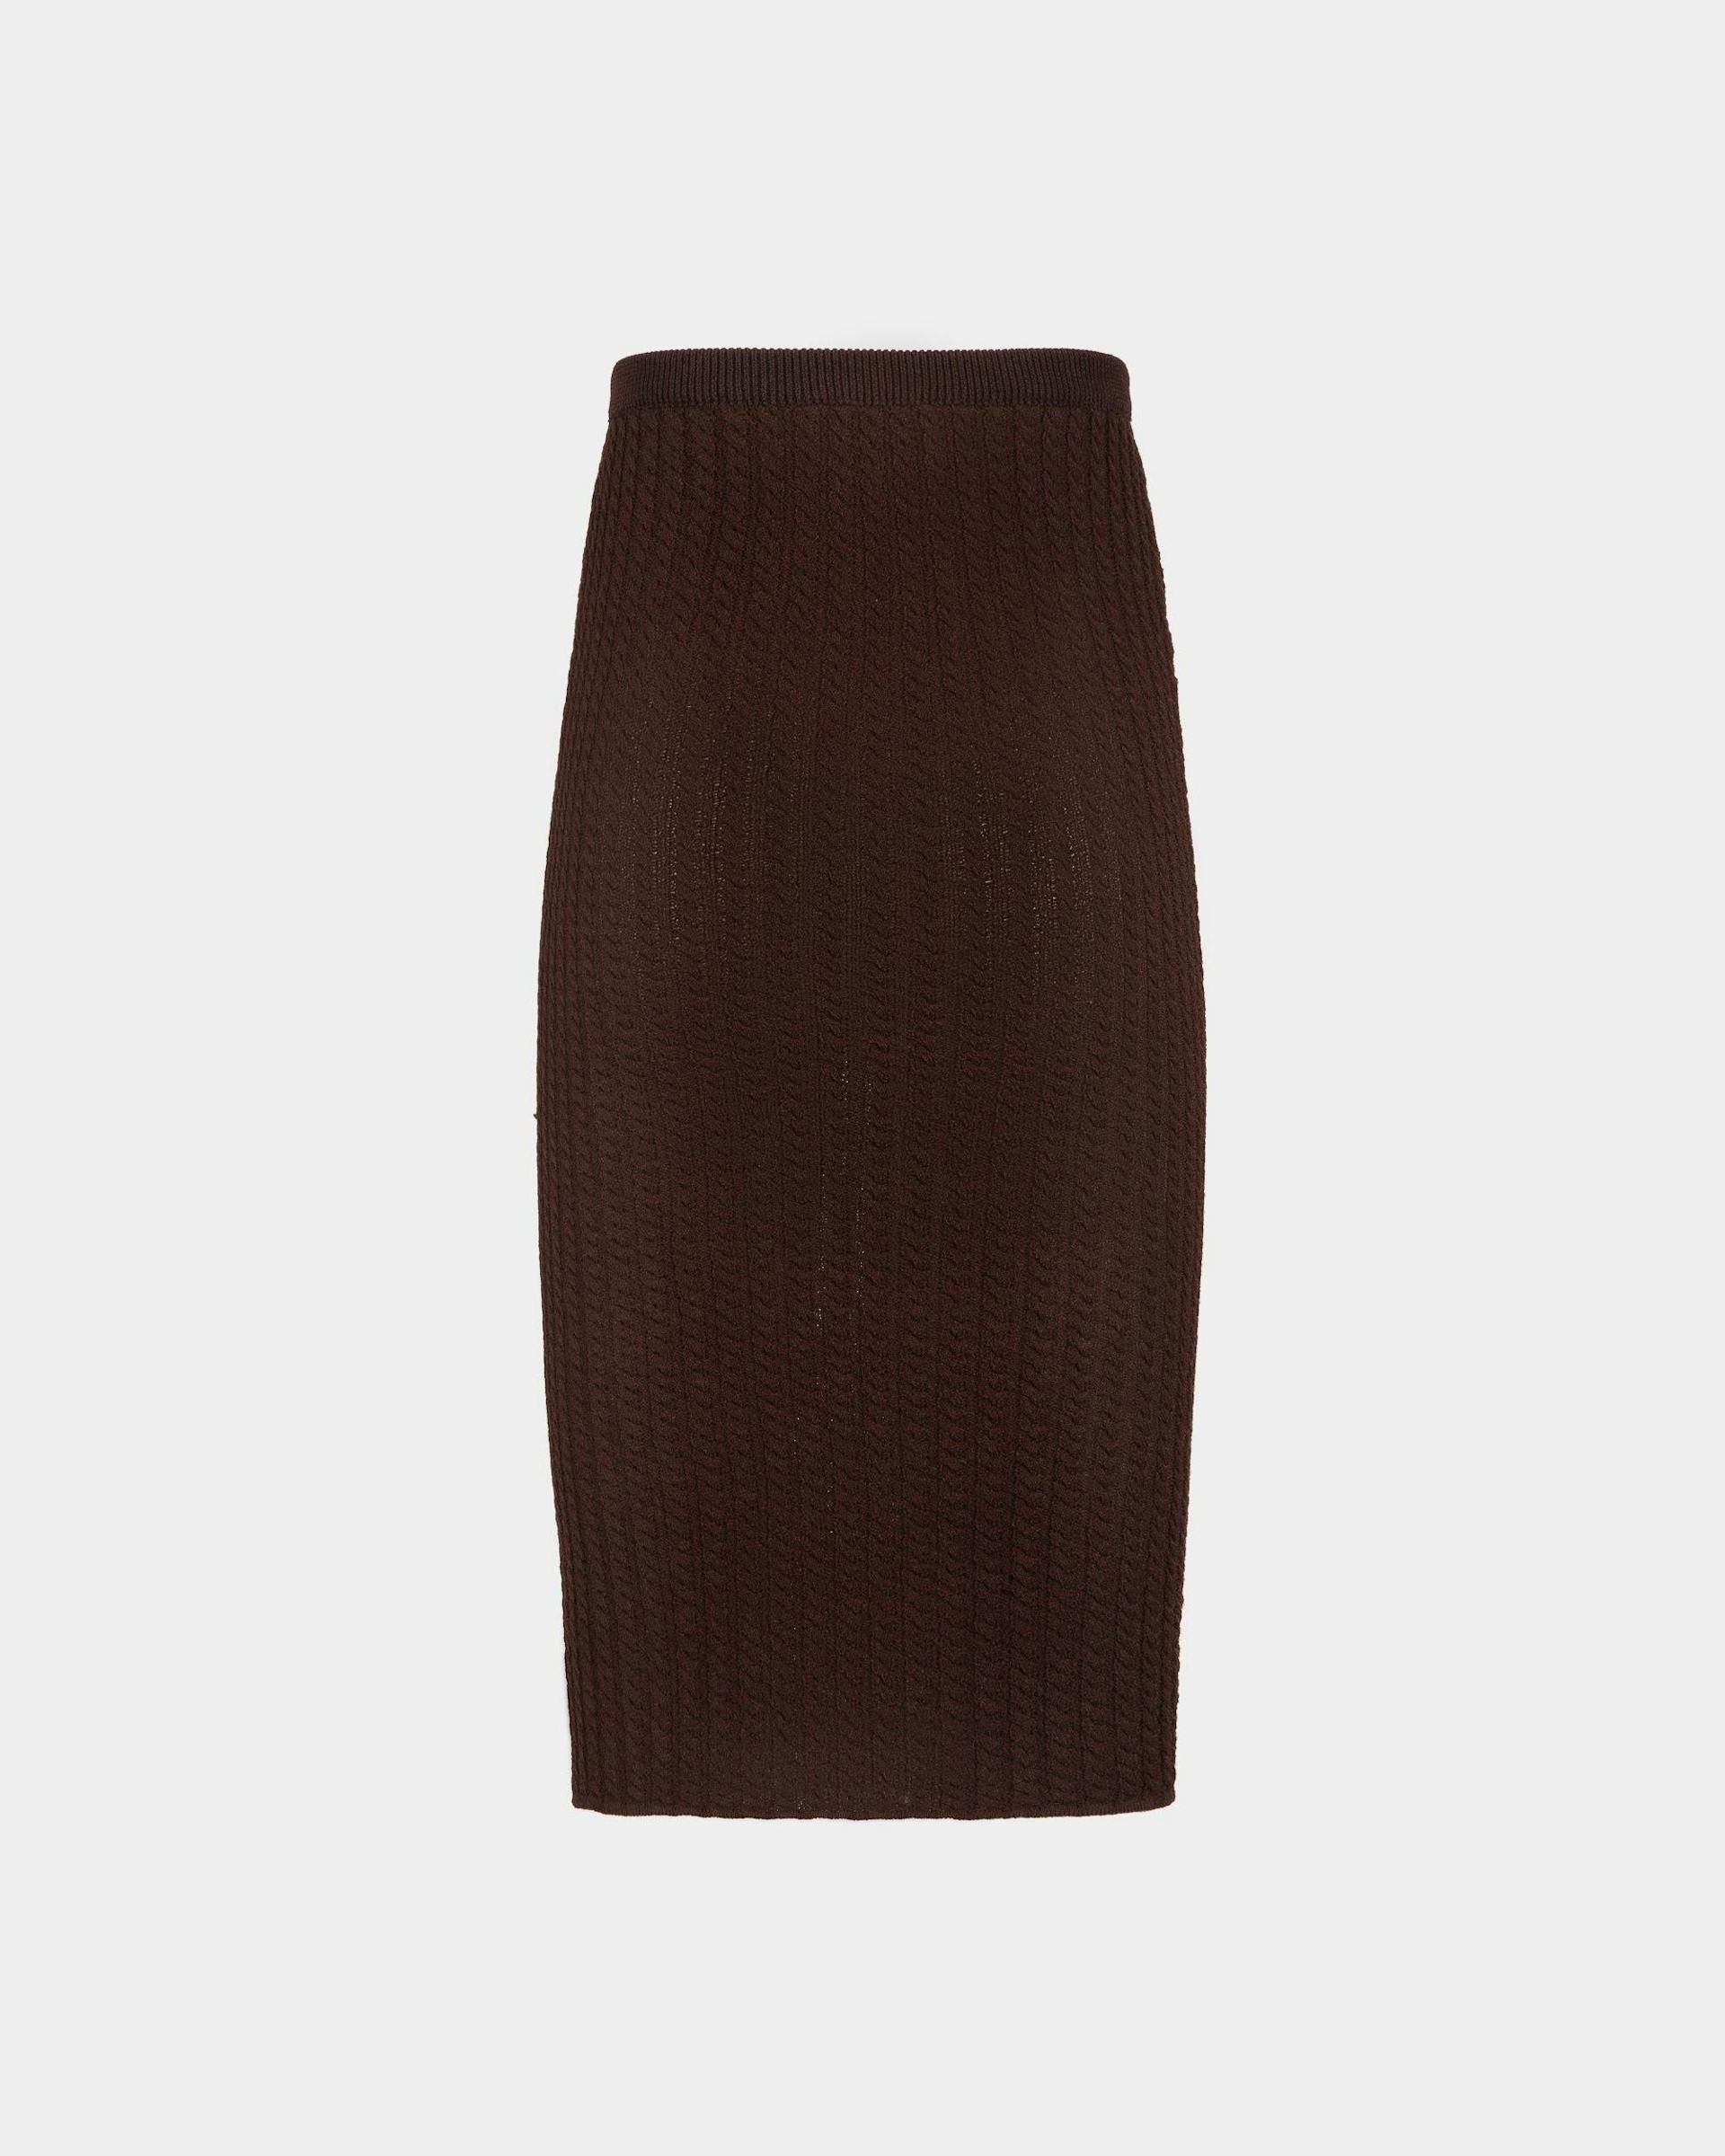 Women's Midi Skirt in Brown Cable Knit Fabric | Bally | Still Life Back